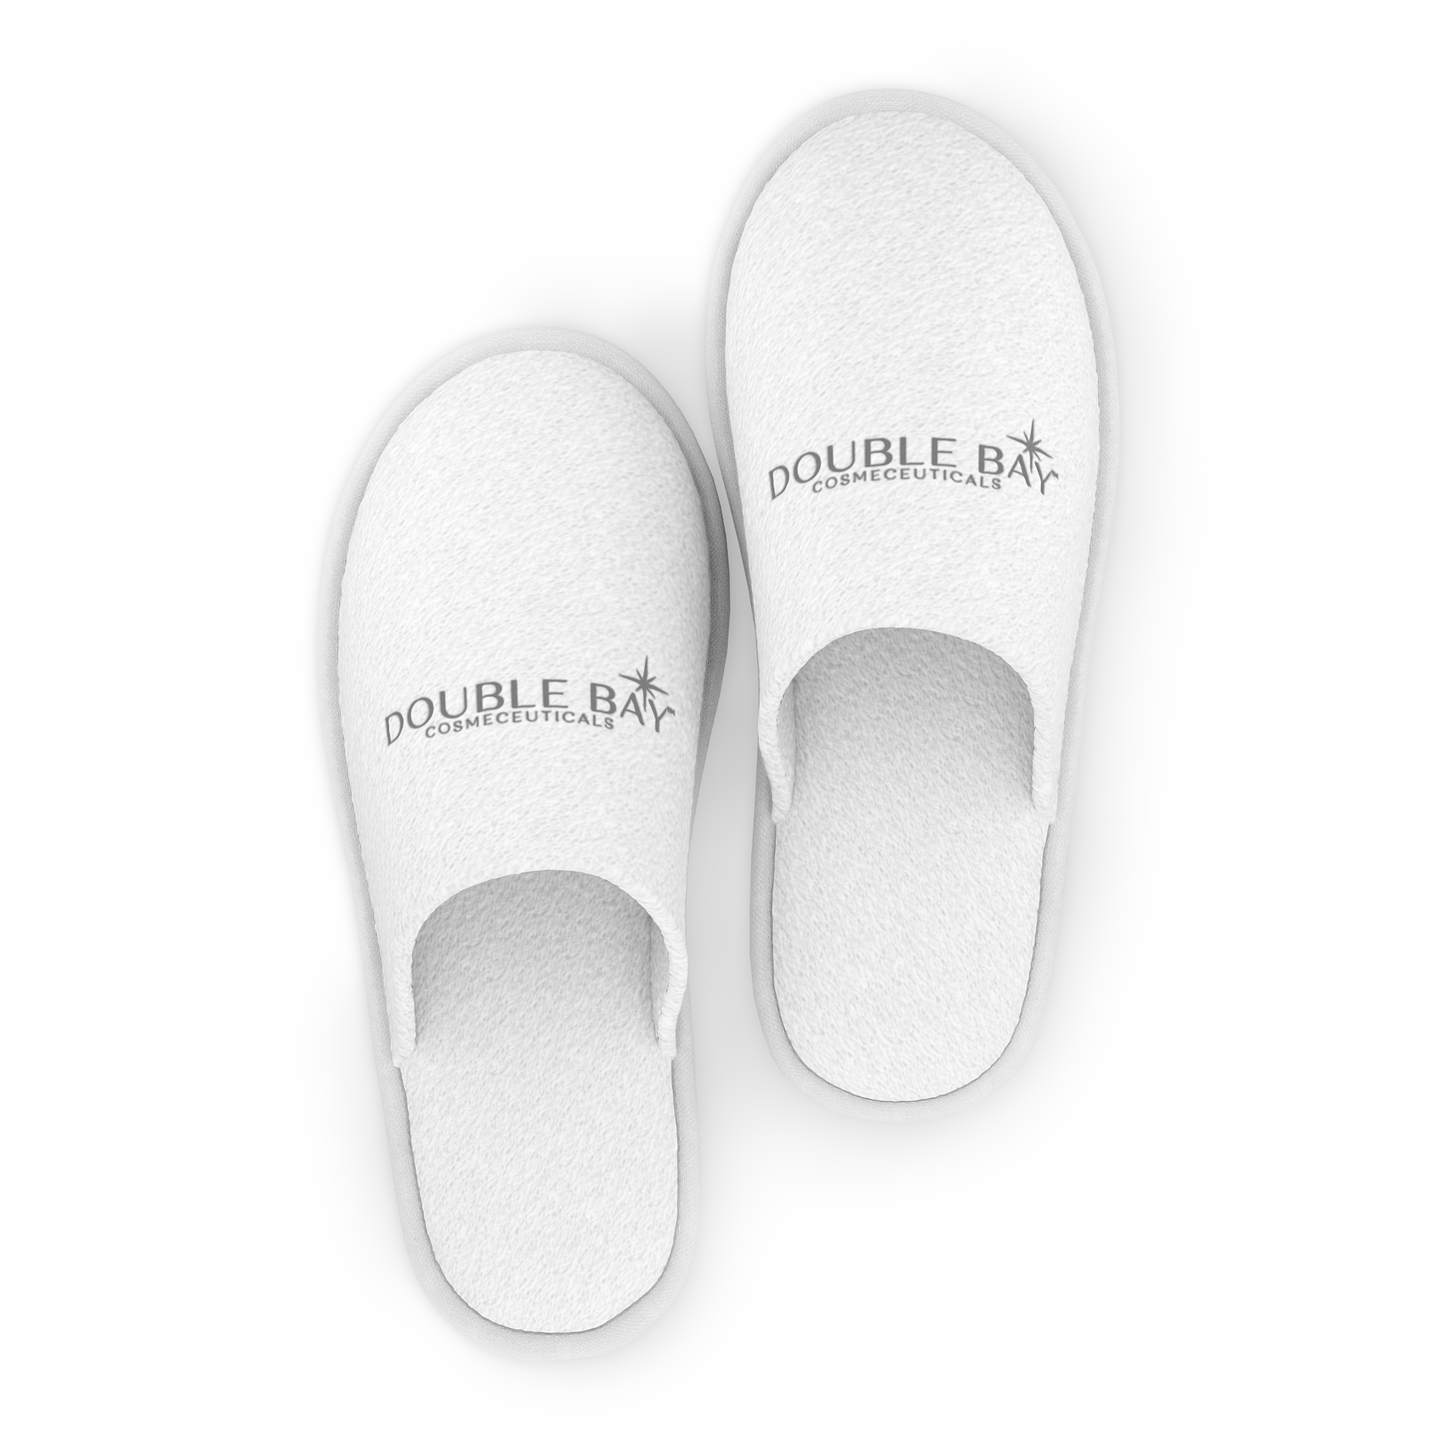 Limited Edition Double Bay Cosmeceuticals Slipper